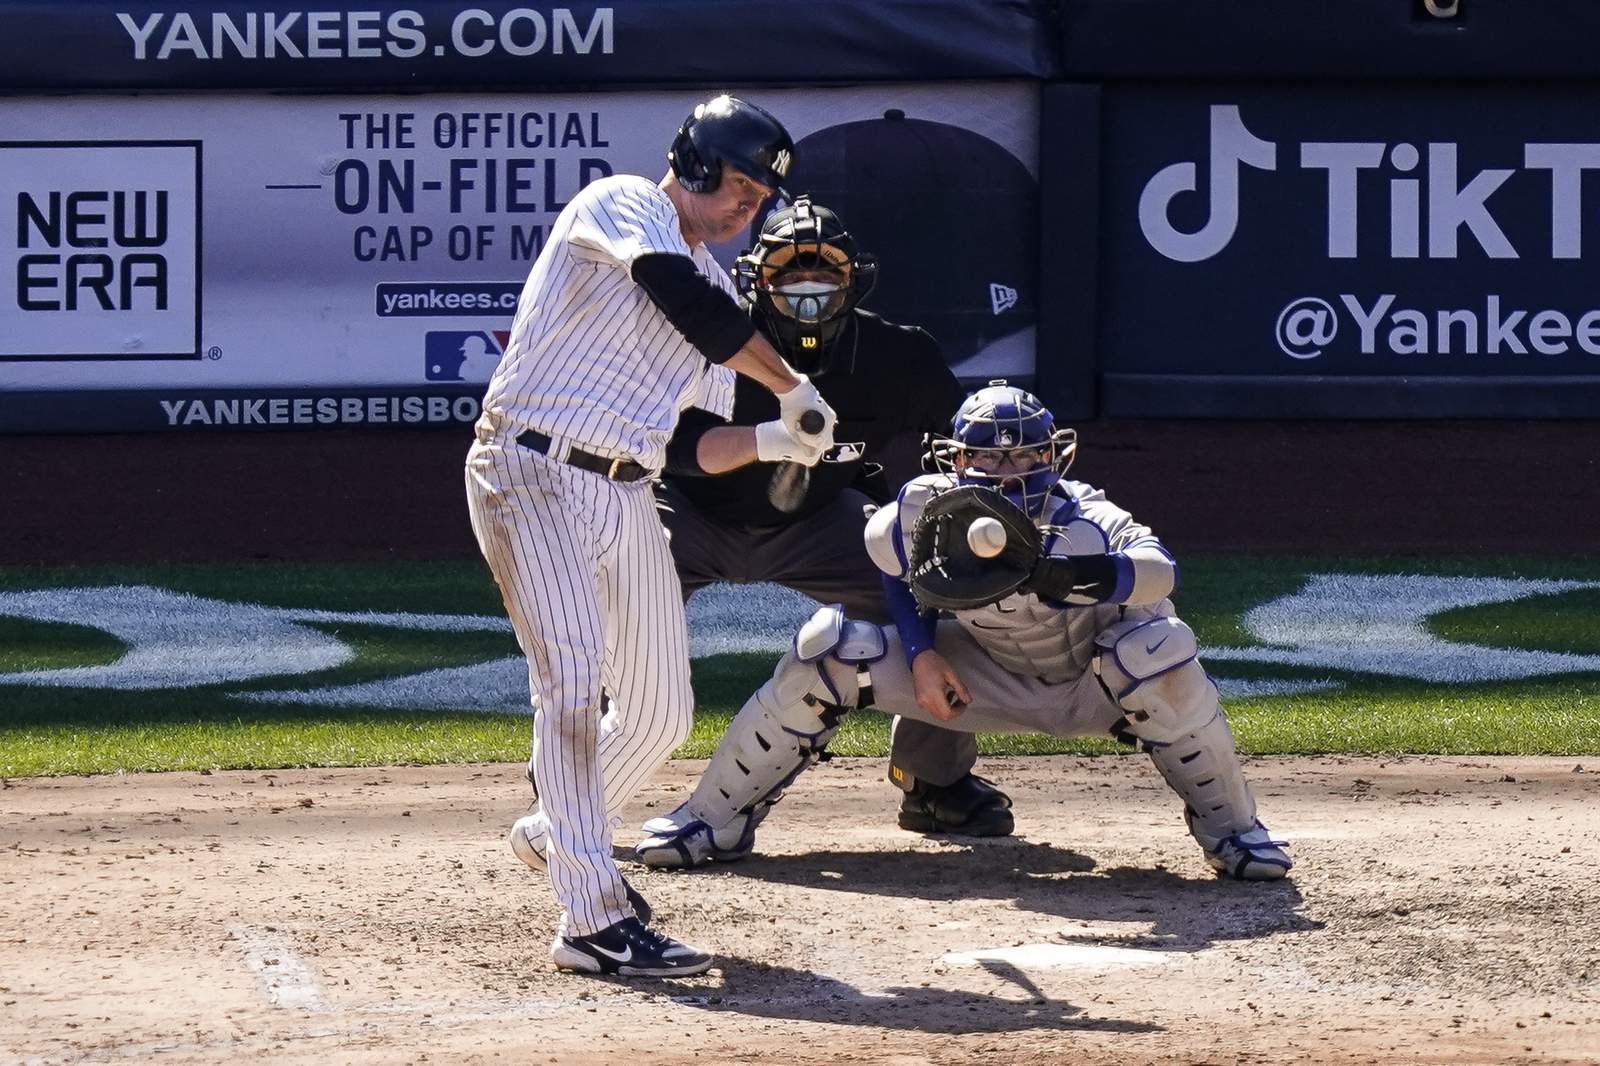 Yankees' Jay Bruce, 34, to retire after Sunday's game